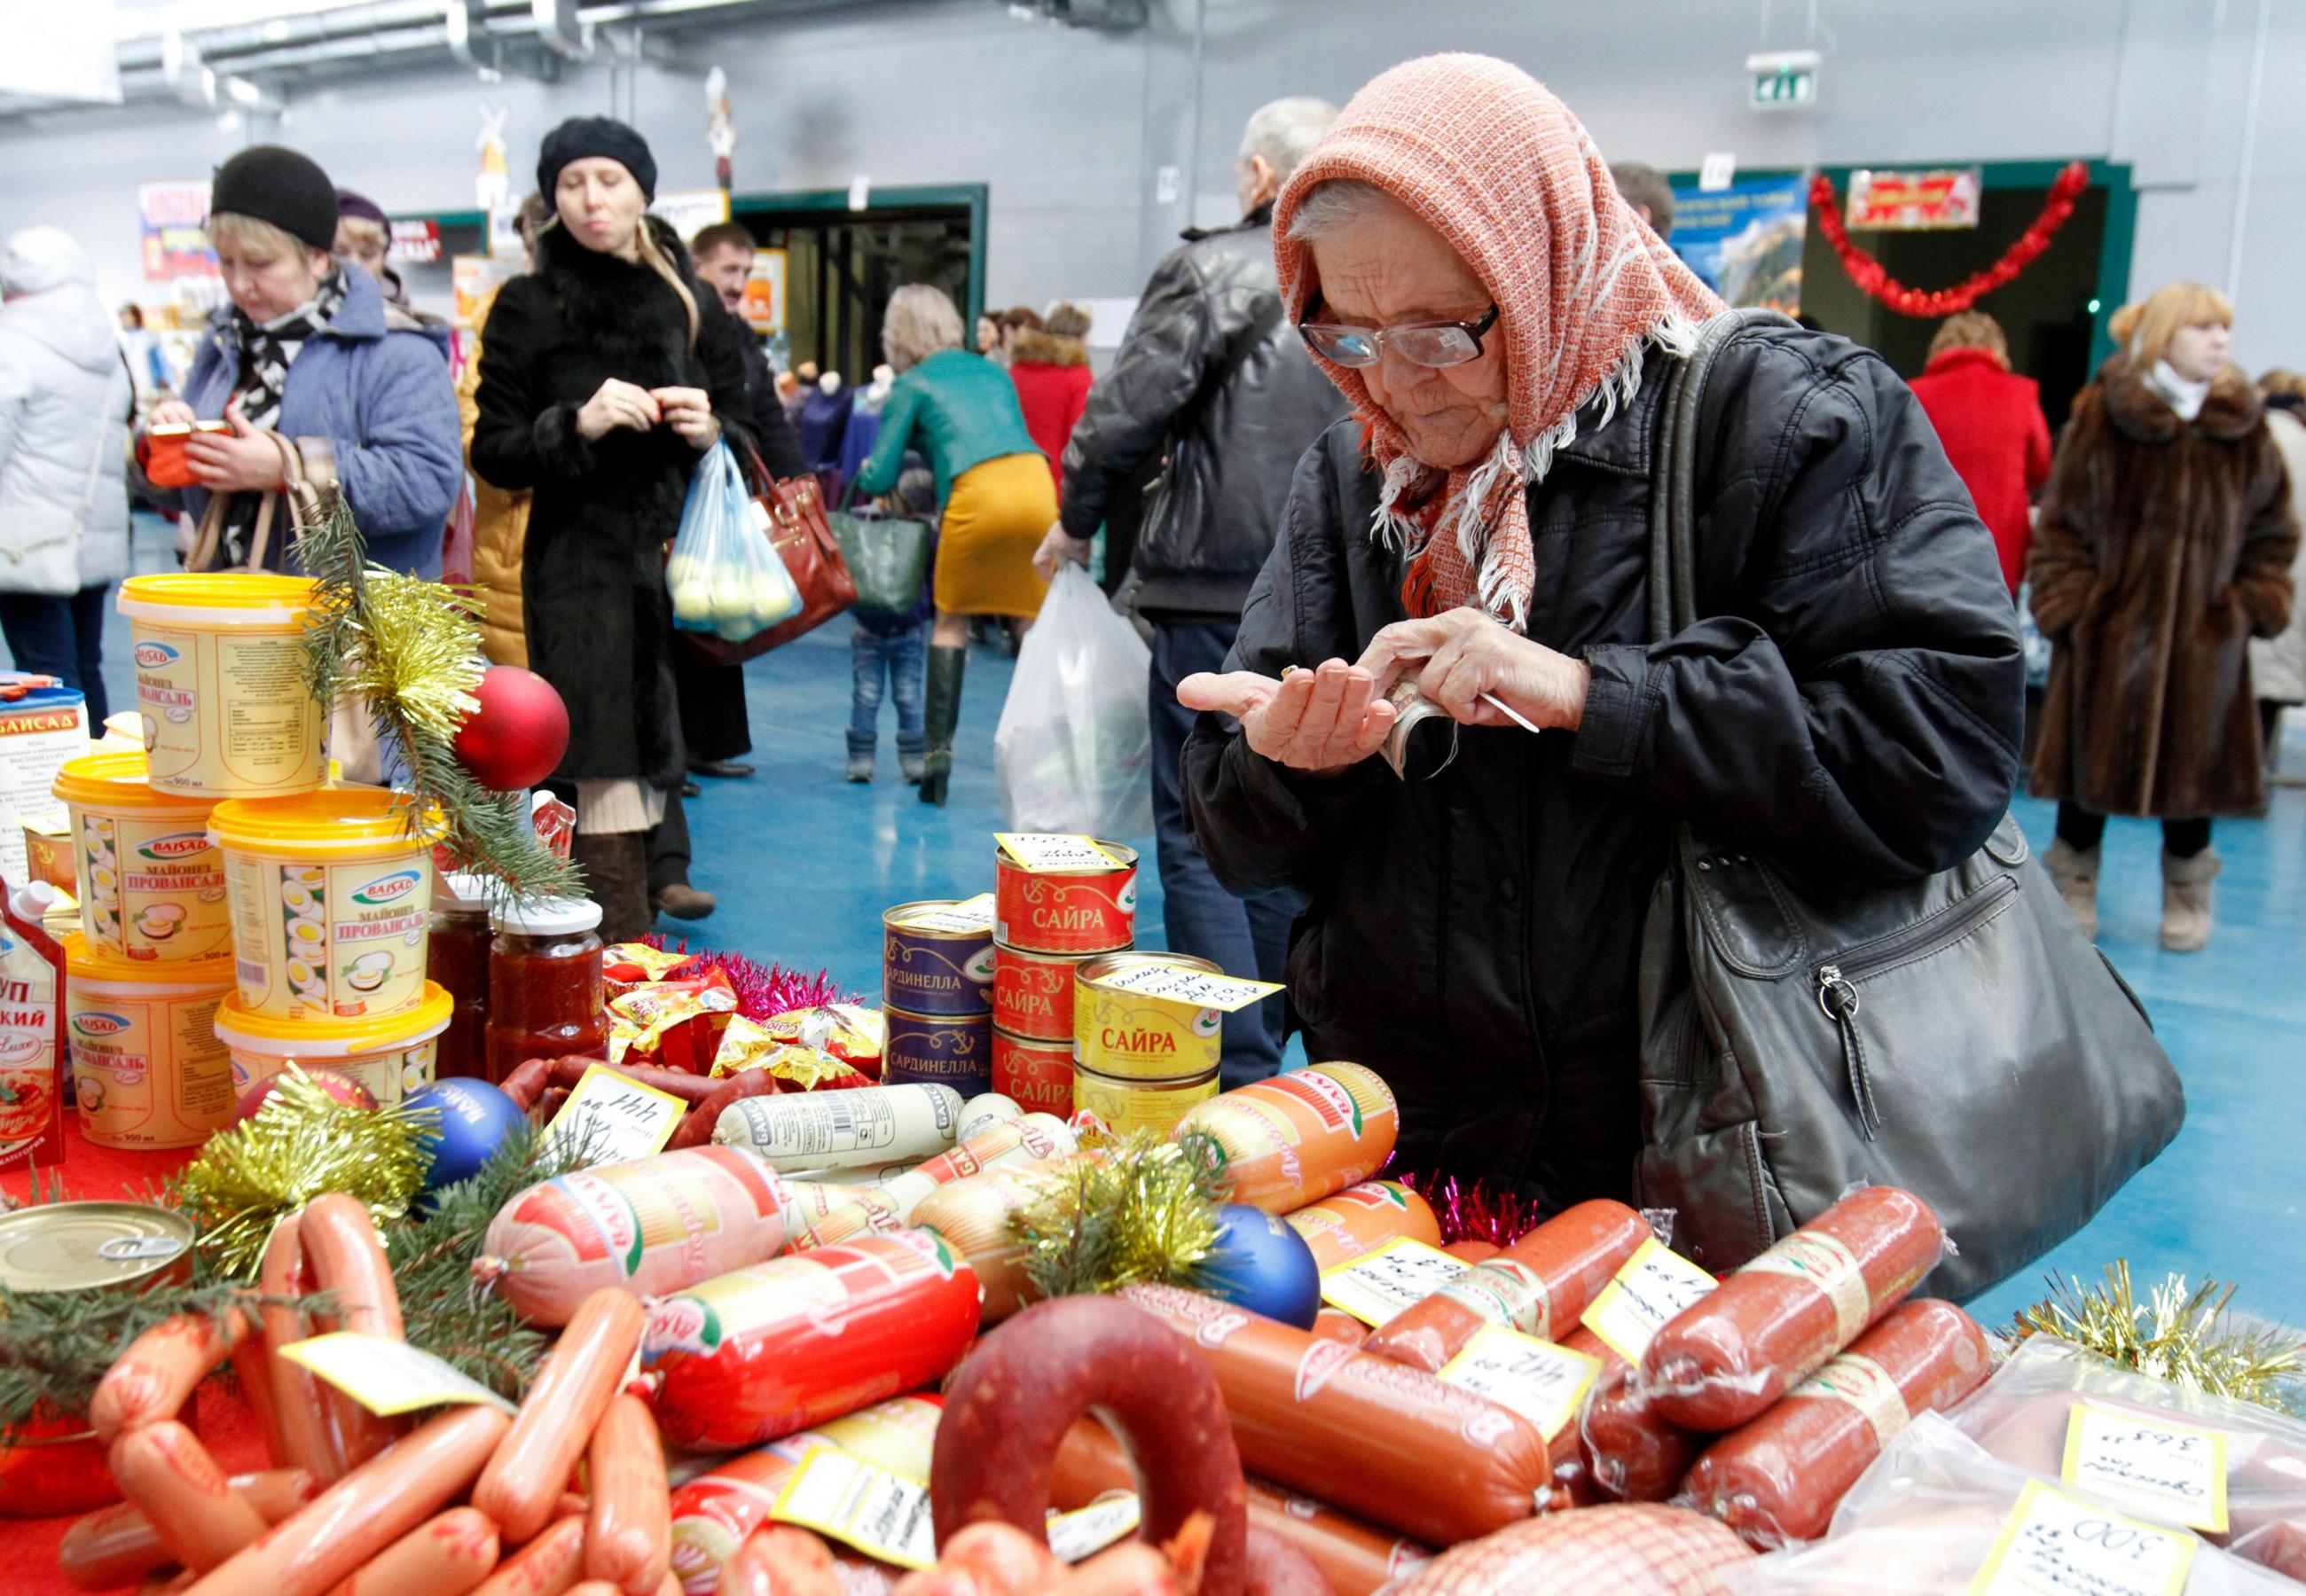 An elderly woman counts money at a food fair in the village of Ulyanovka, south-east of Stavropol, Russia, in this December 22, 2015